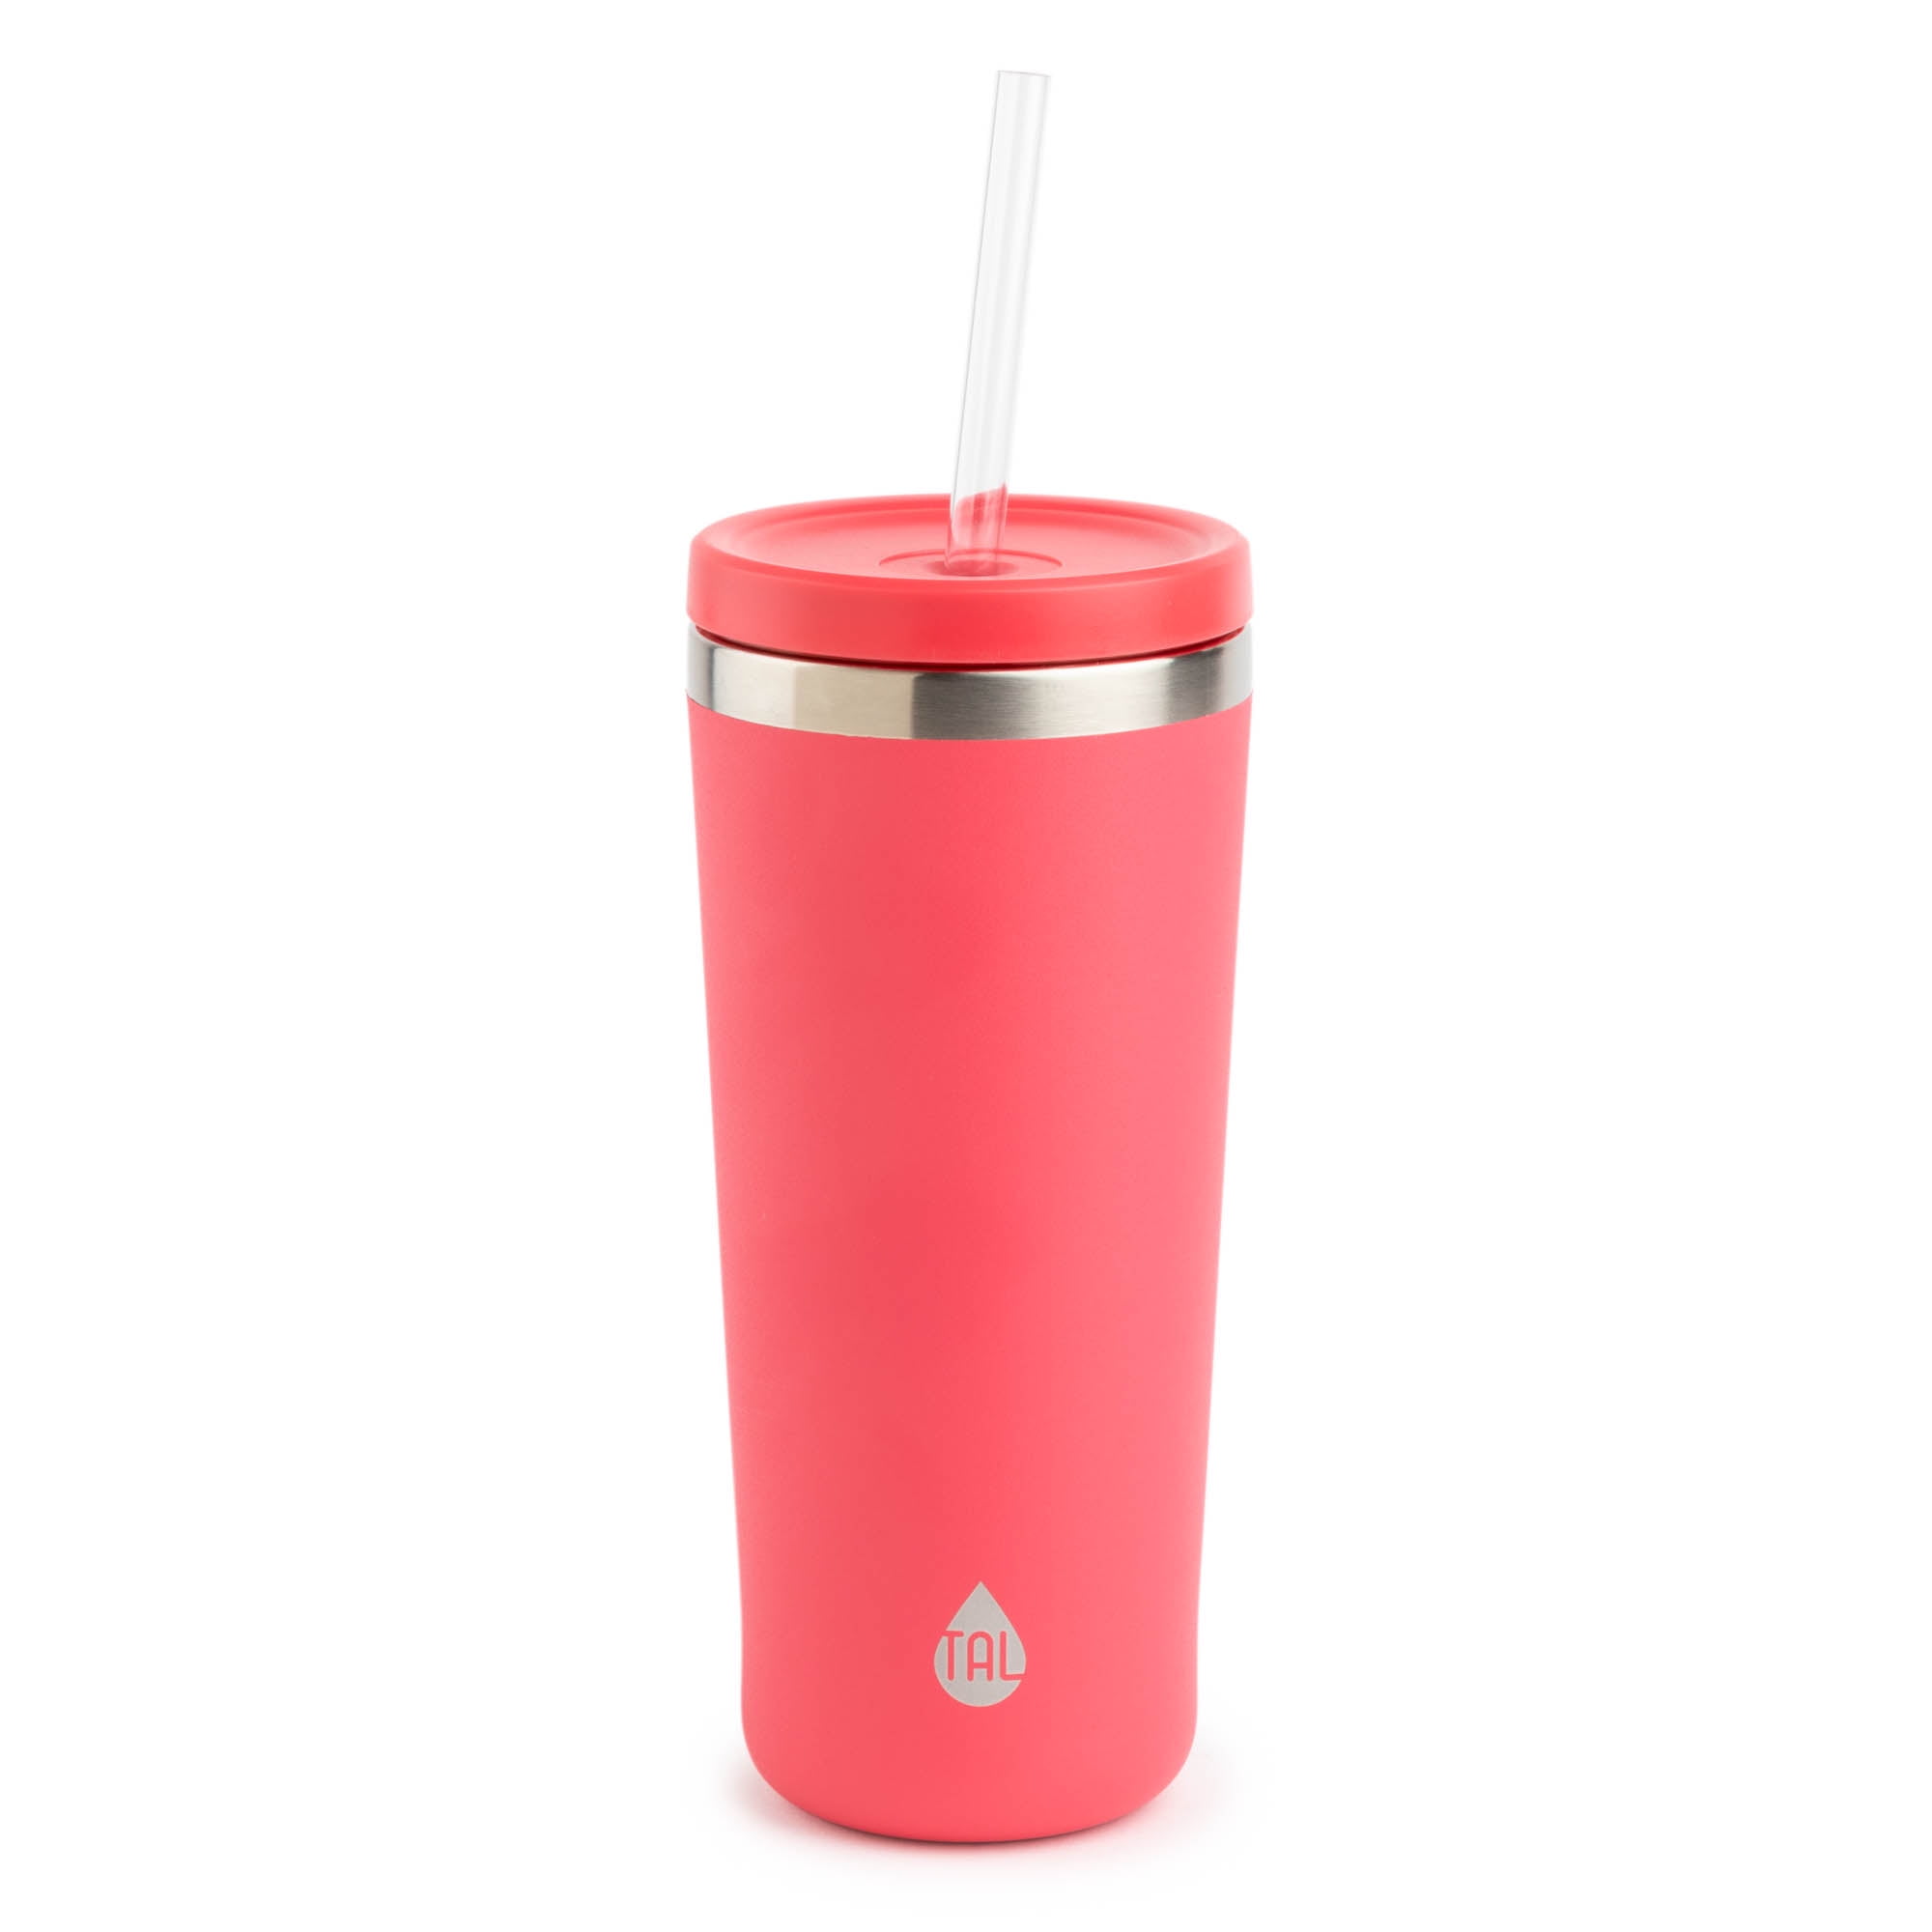 TAL Stainless Steel Coolie Tumbler with Straw 24 fl oz, Green Leaf -  Tumblers